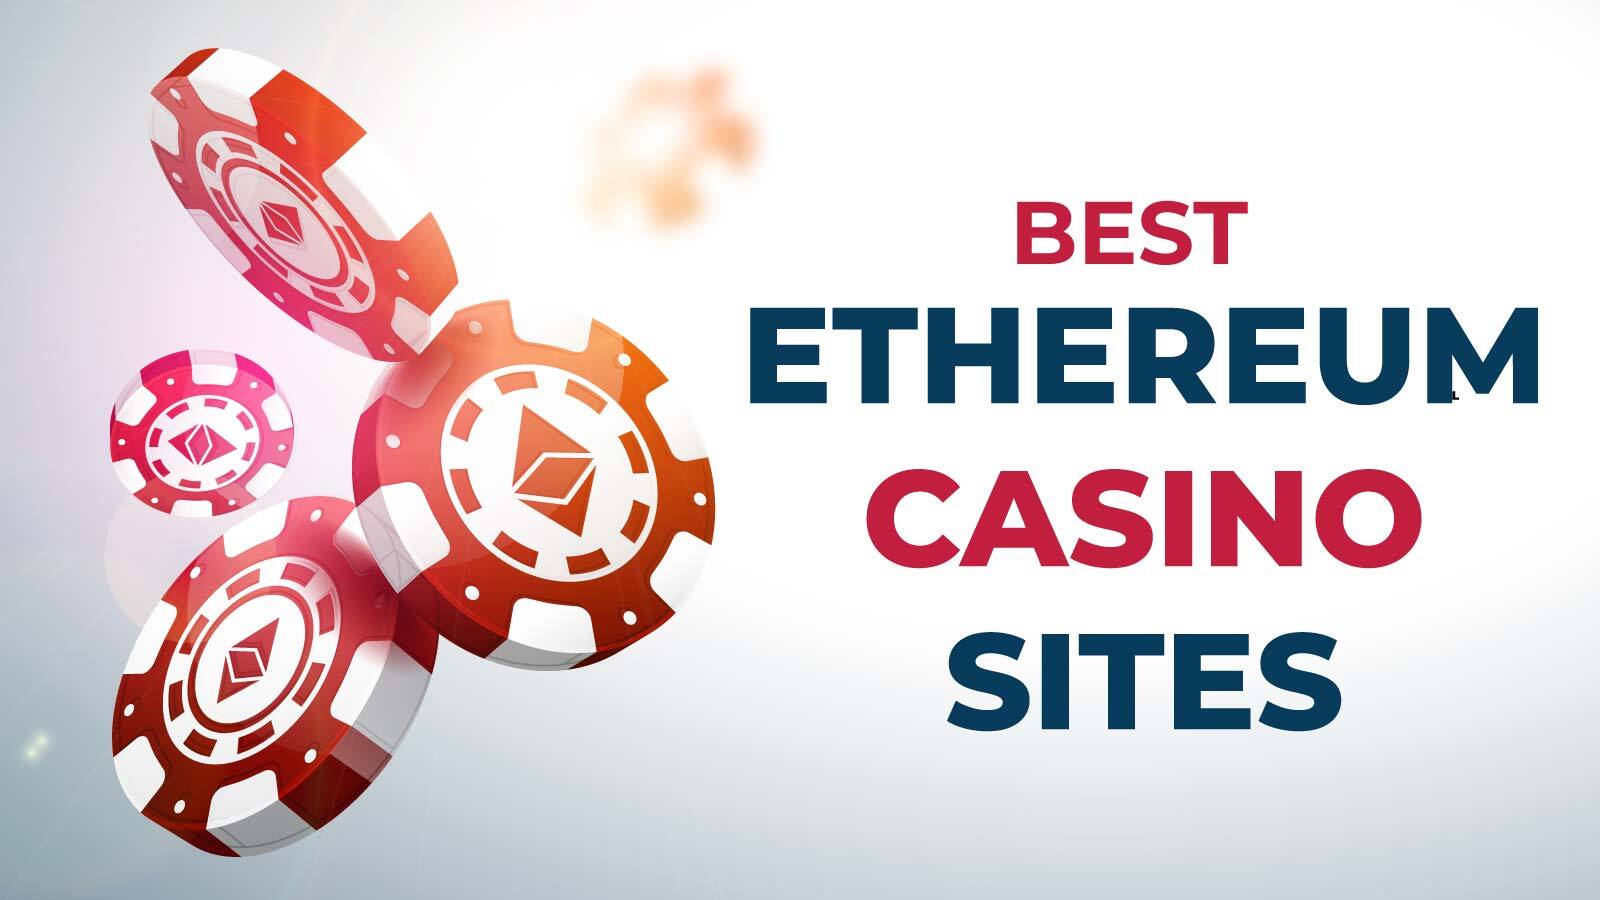 The Stuff About best ethereum gambling sites You Probably Hadn't Considered. And Really Should